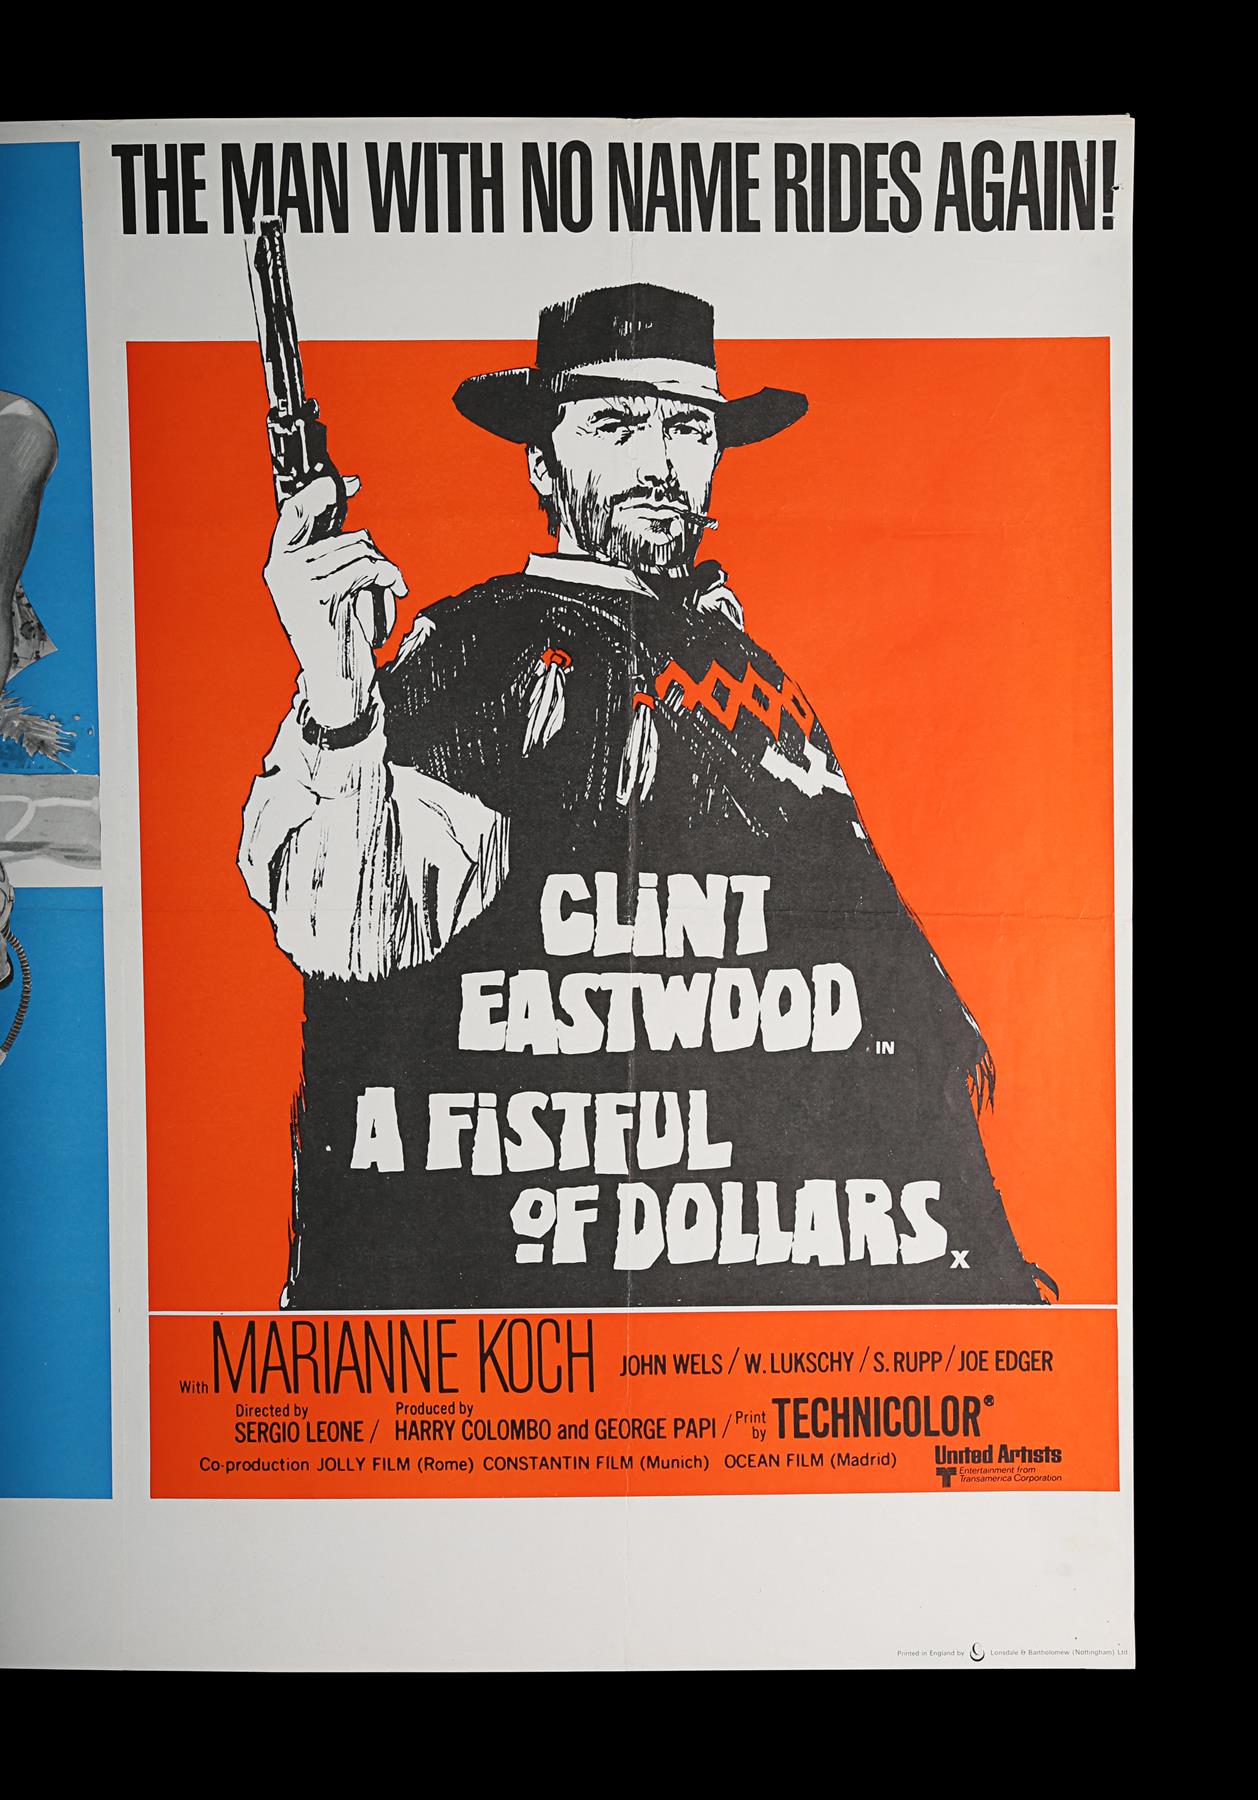 YOU ONLY LIVE TWICE (1967)/A FISTFUL OF DOLLARS (1967) - UK Quad Double-Bill Poster, 1971 Re-Release - Image 3 of 5